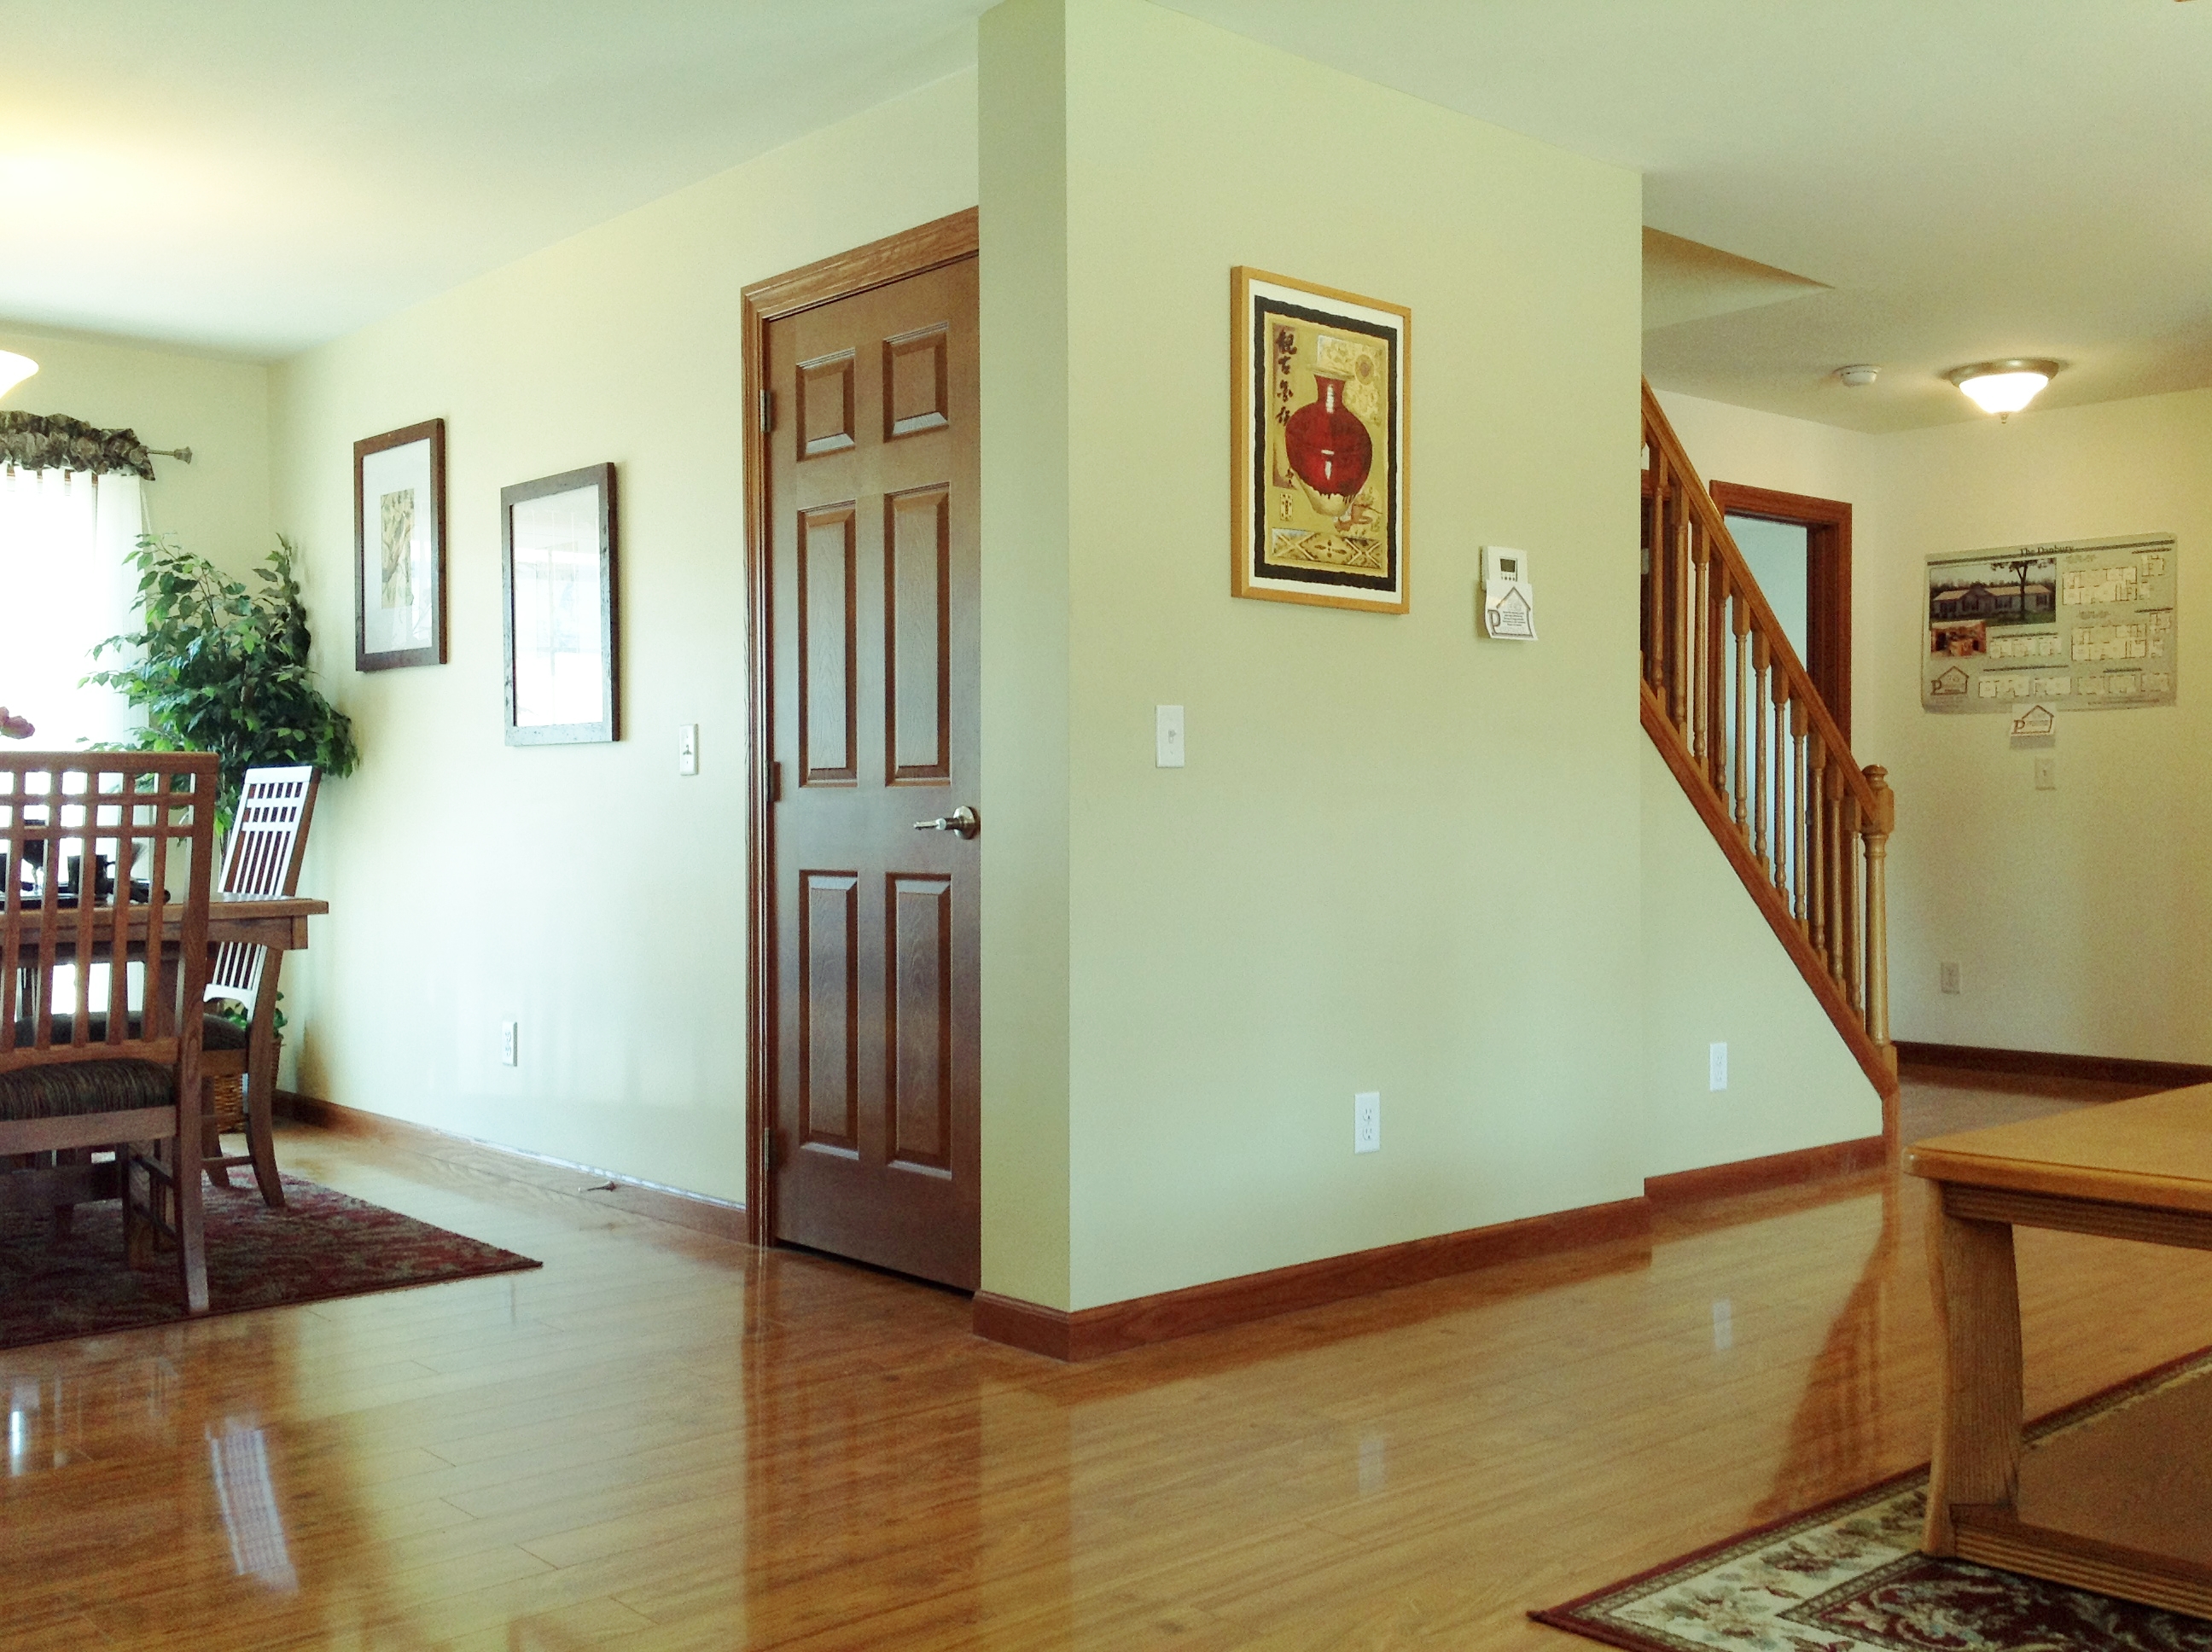 Displayed with laminate floor throughout the living area.